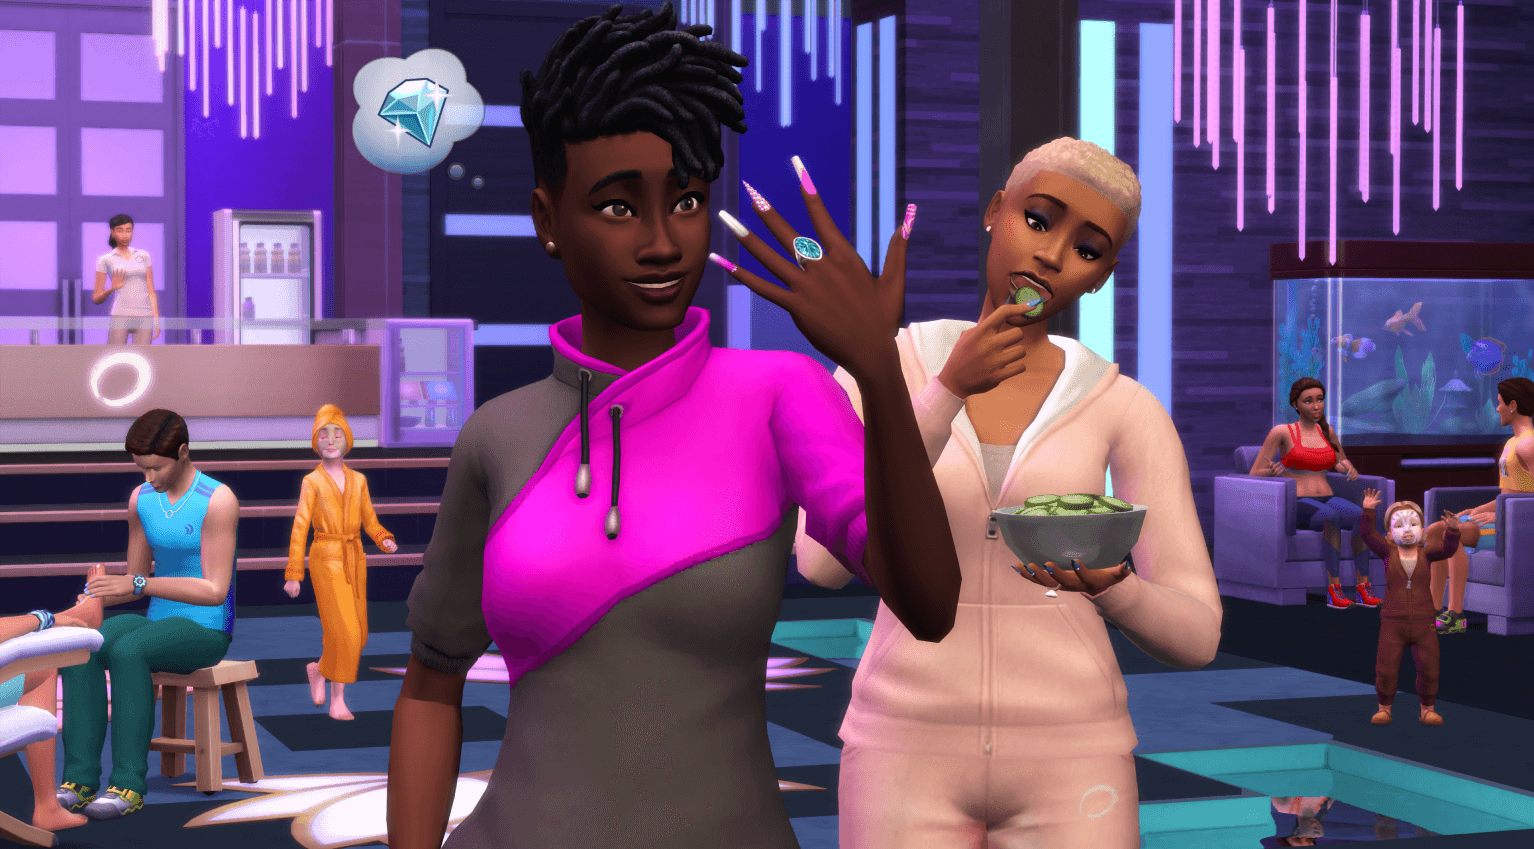 Everything we know about Sims 4 multiplayer